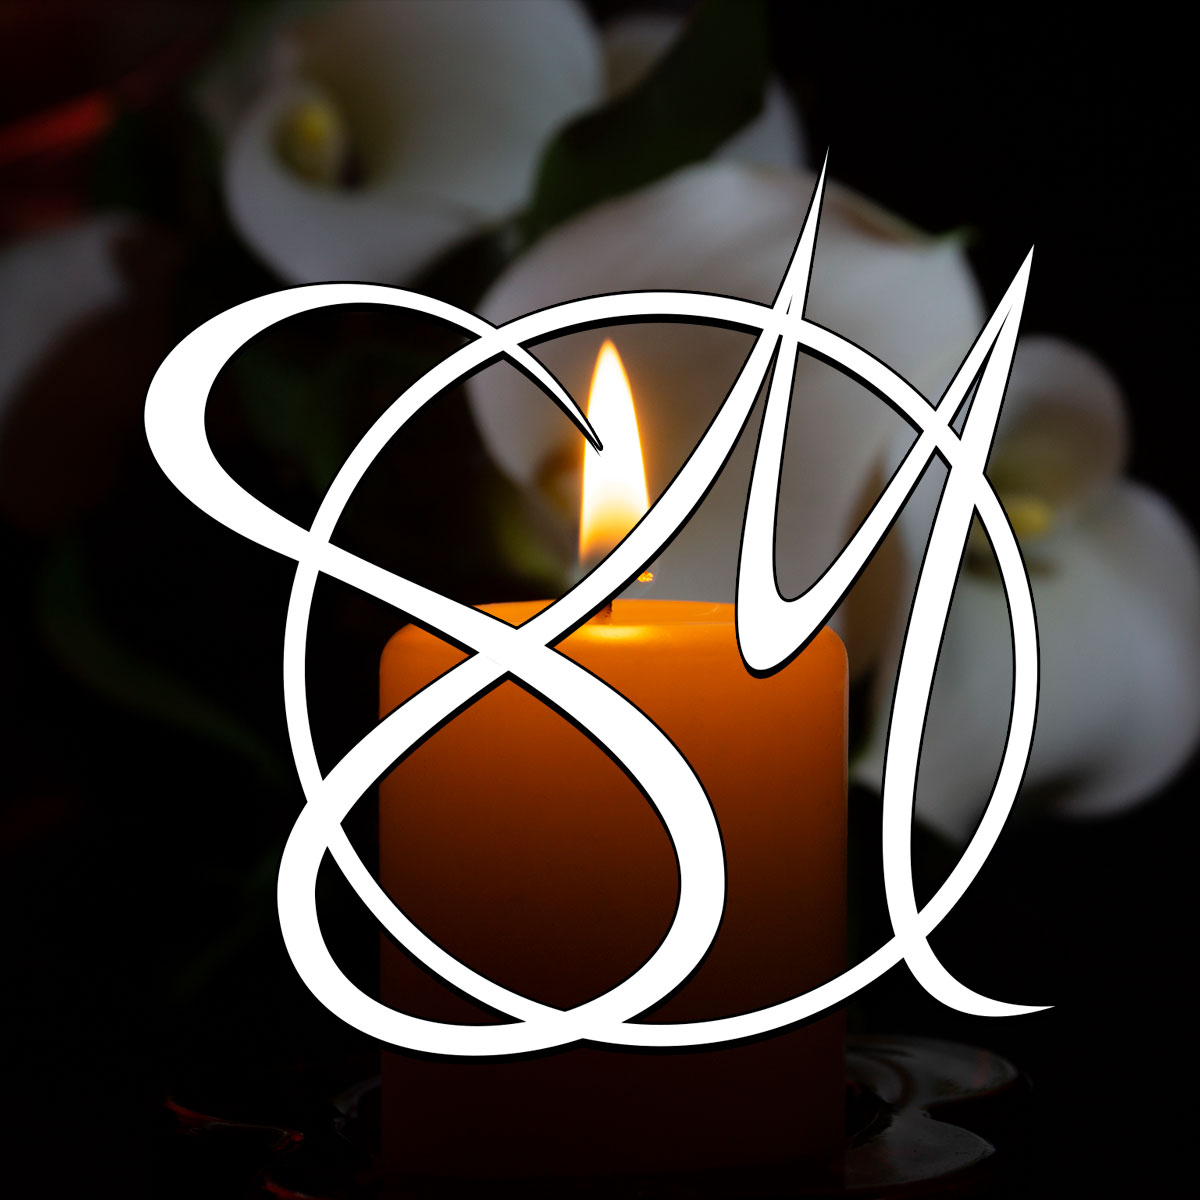 White Sosebee Mortuary logo in front of lit candle with dark background.